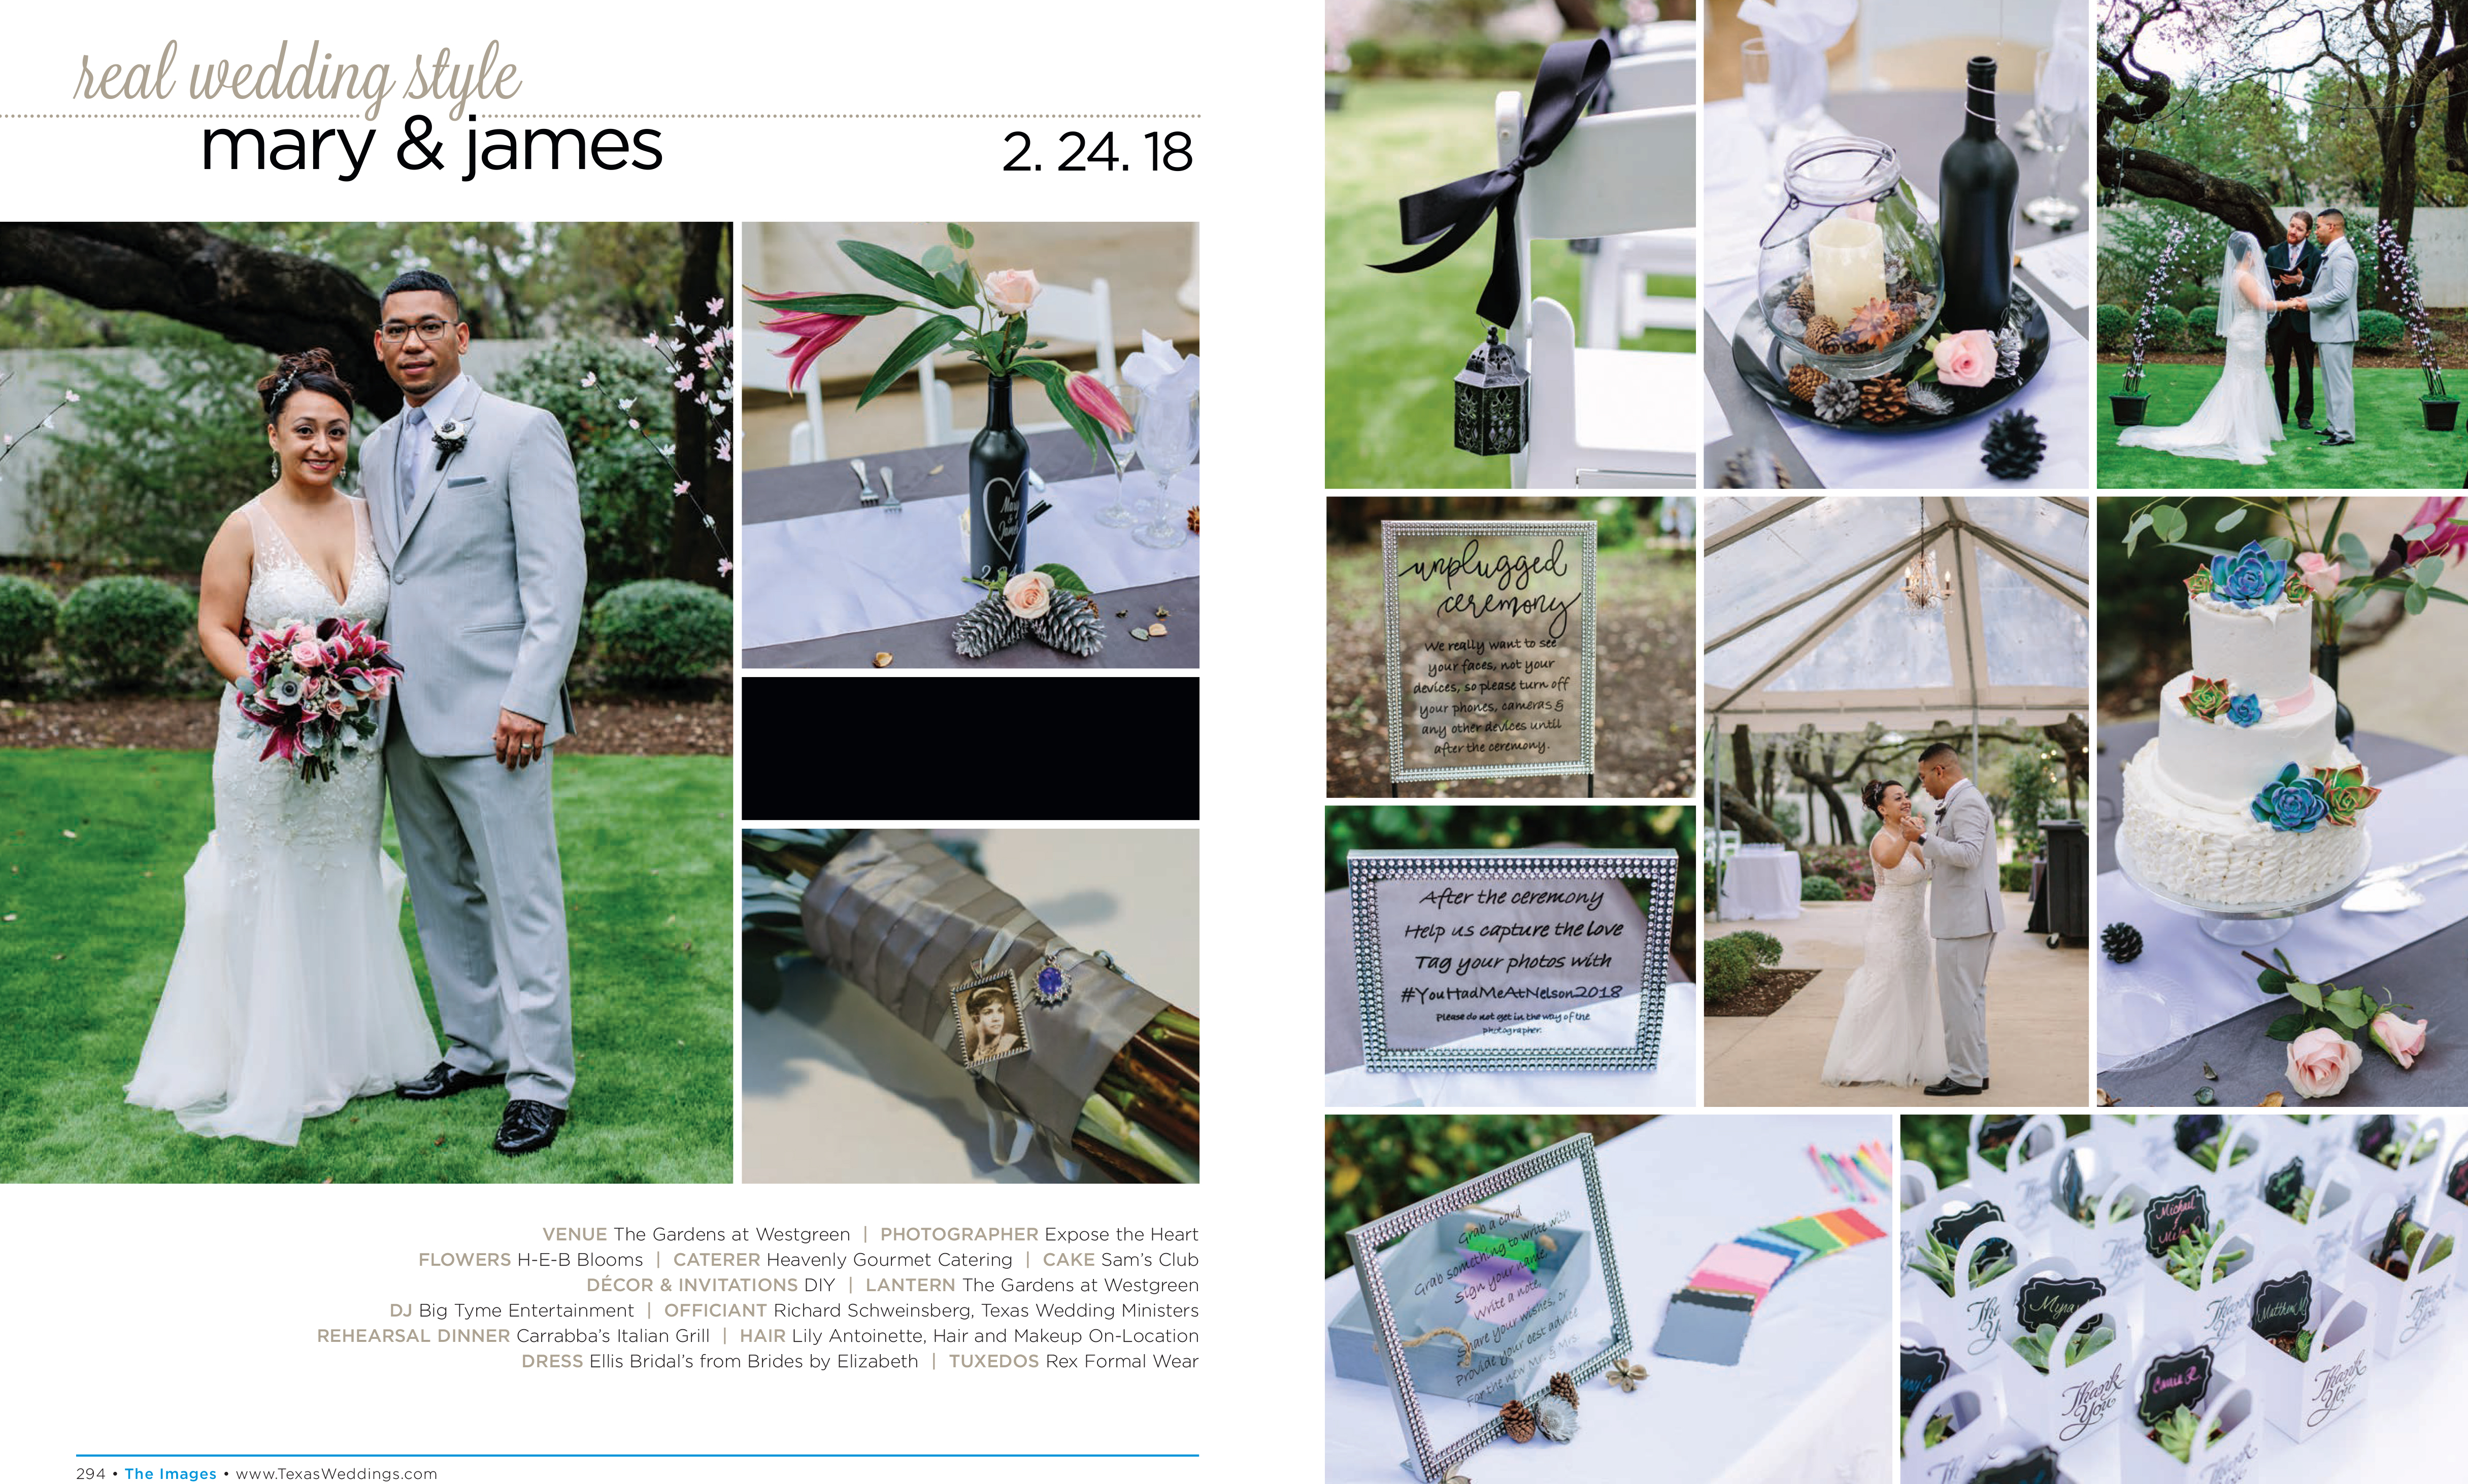 Mary & James in their Real Wedding Page in the Fall/Winter 2018 Texas Wedding Guide